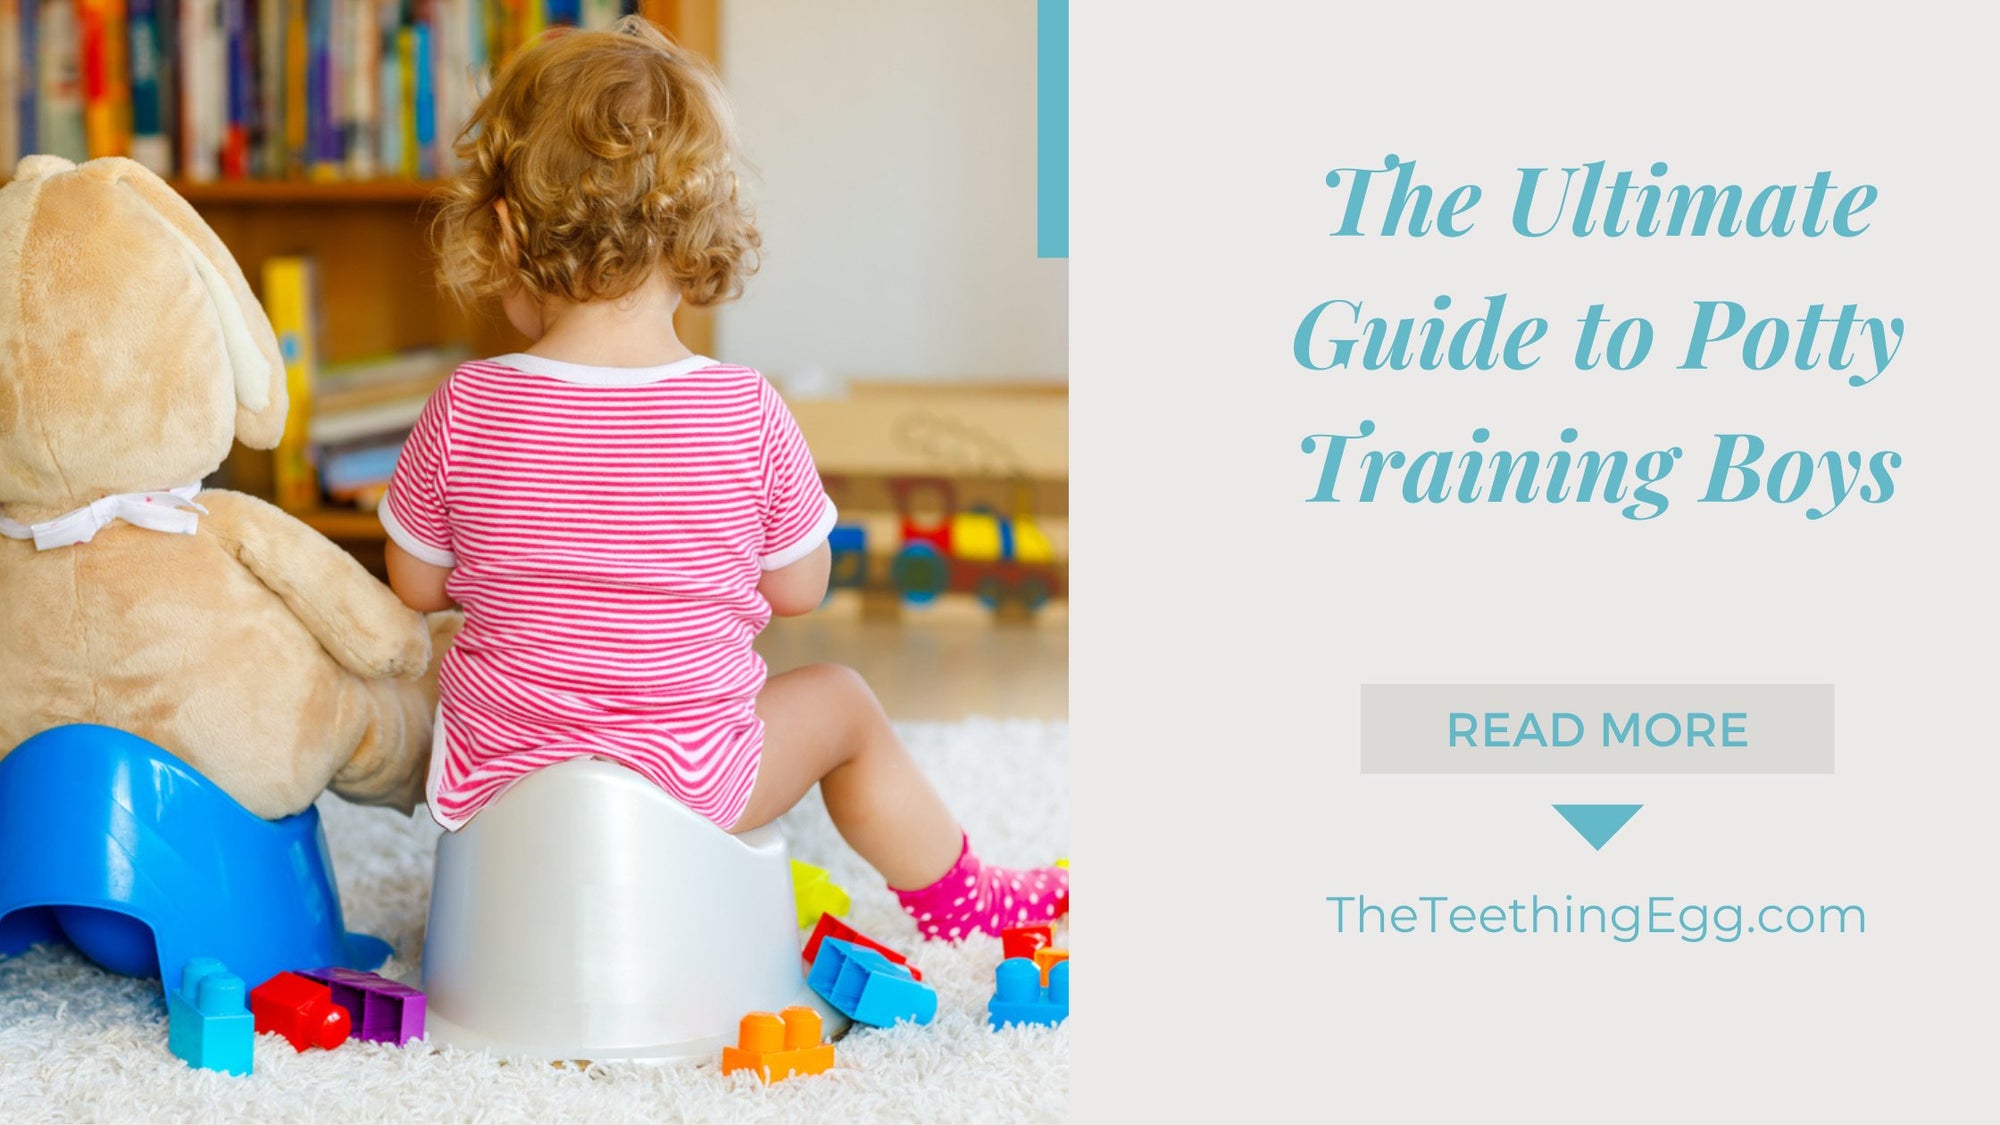 The Ultimate Guide to Potty Training Boys: Tips, Tricks, and Milestones